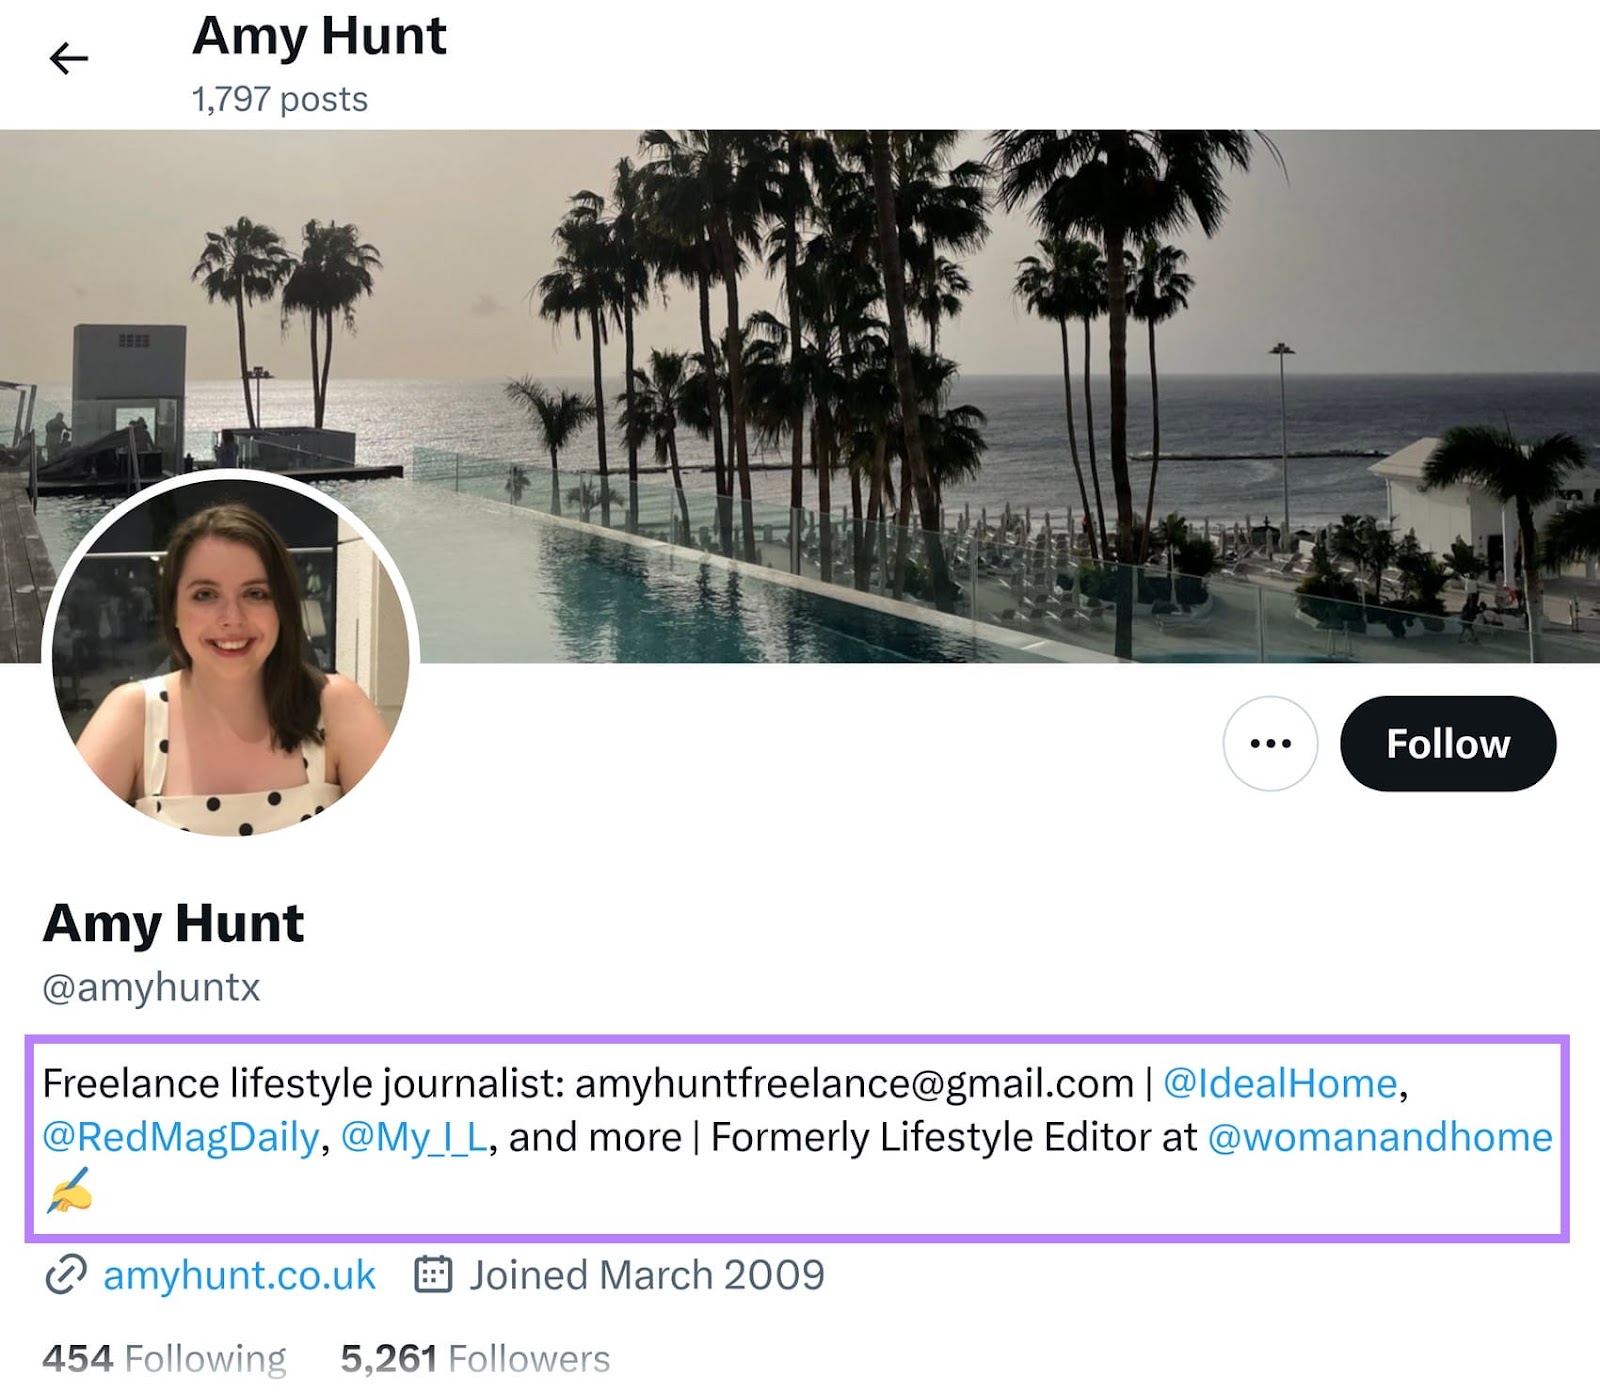 An expert's X (Twitter) profile with a highlighted freelance journalist bio and affiliations, all within a purple box.